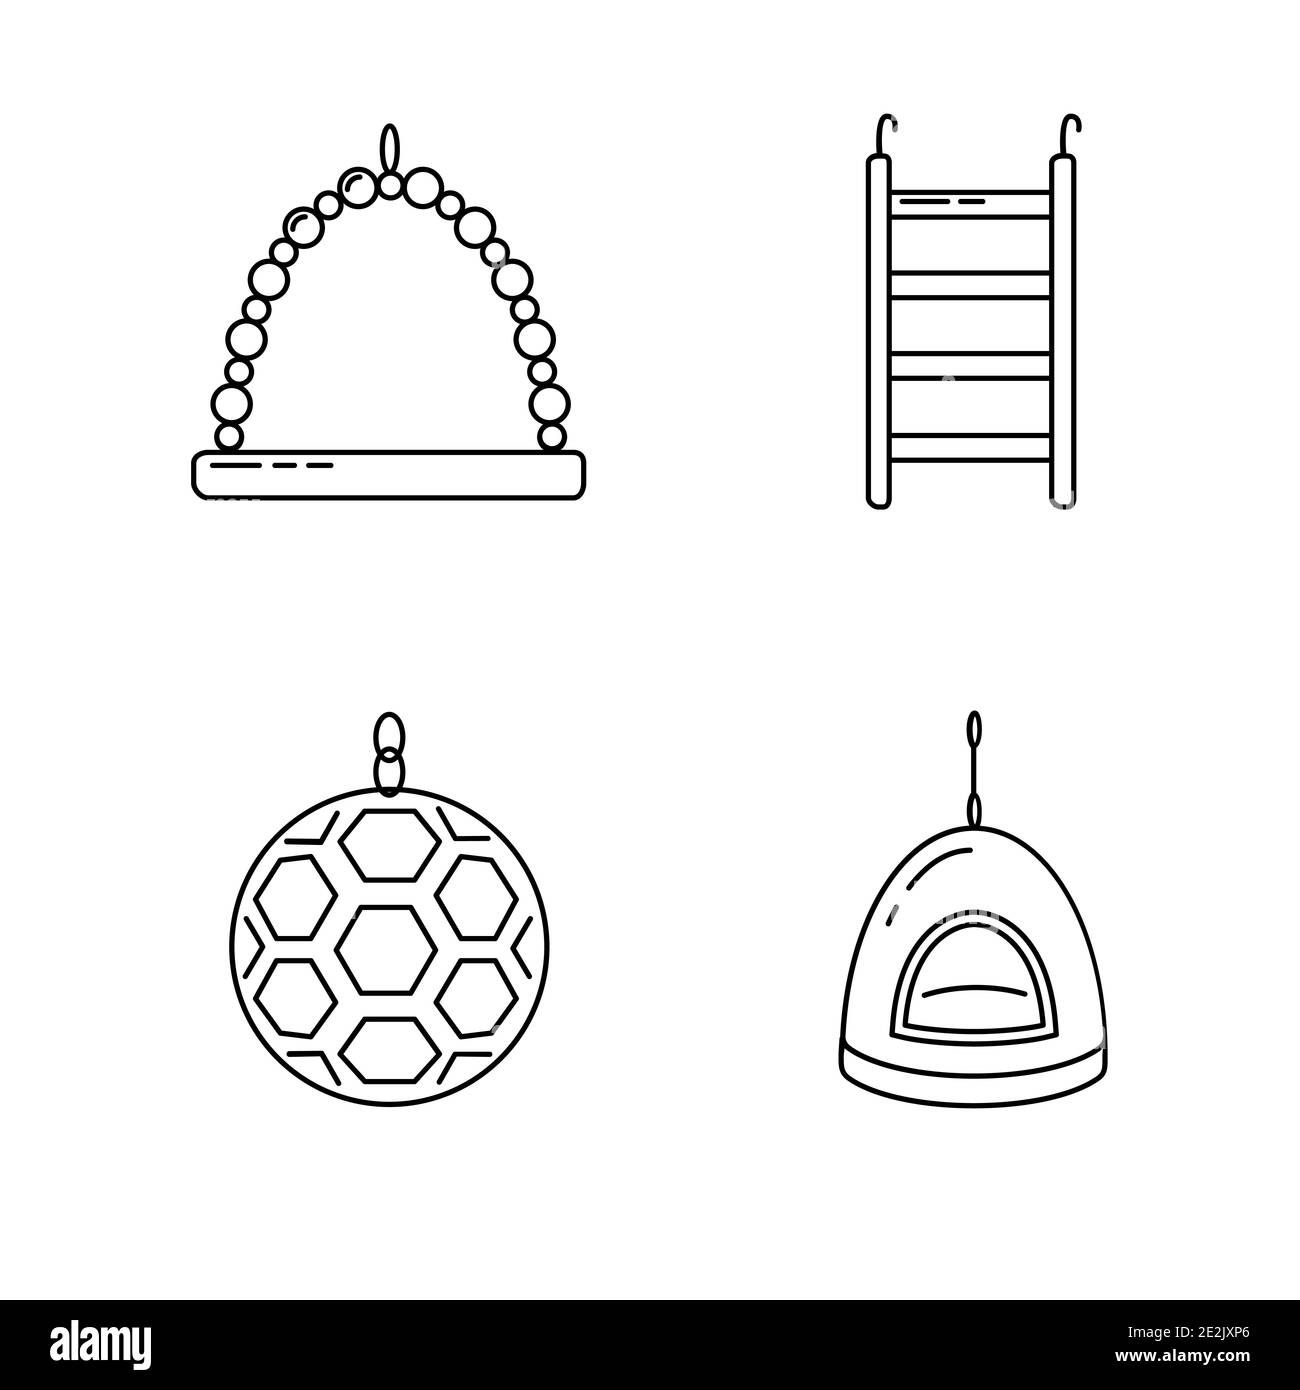 Icon set of accessories for parrot, canary or other bird in cage. Pet supplies collection in thin line style. Stock Vector